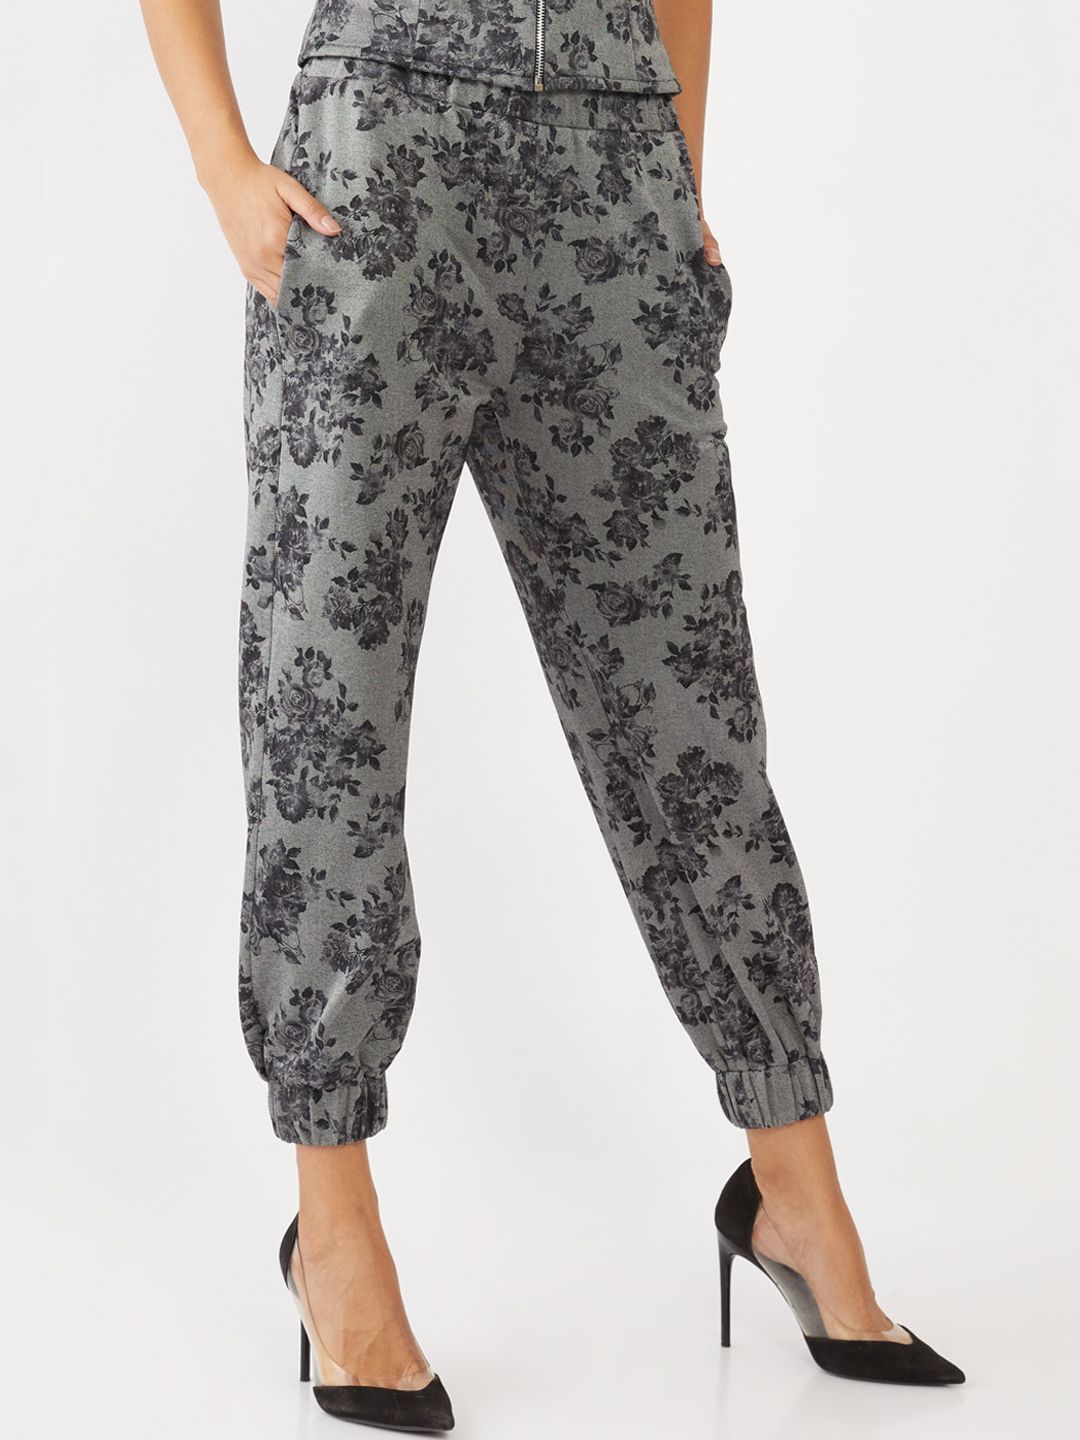 Zink London Women Grey Floral Printed Slim Fit High-Rise Joggers Trousers Price in India